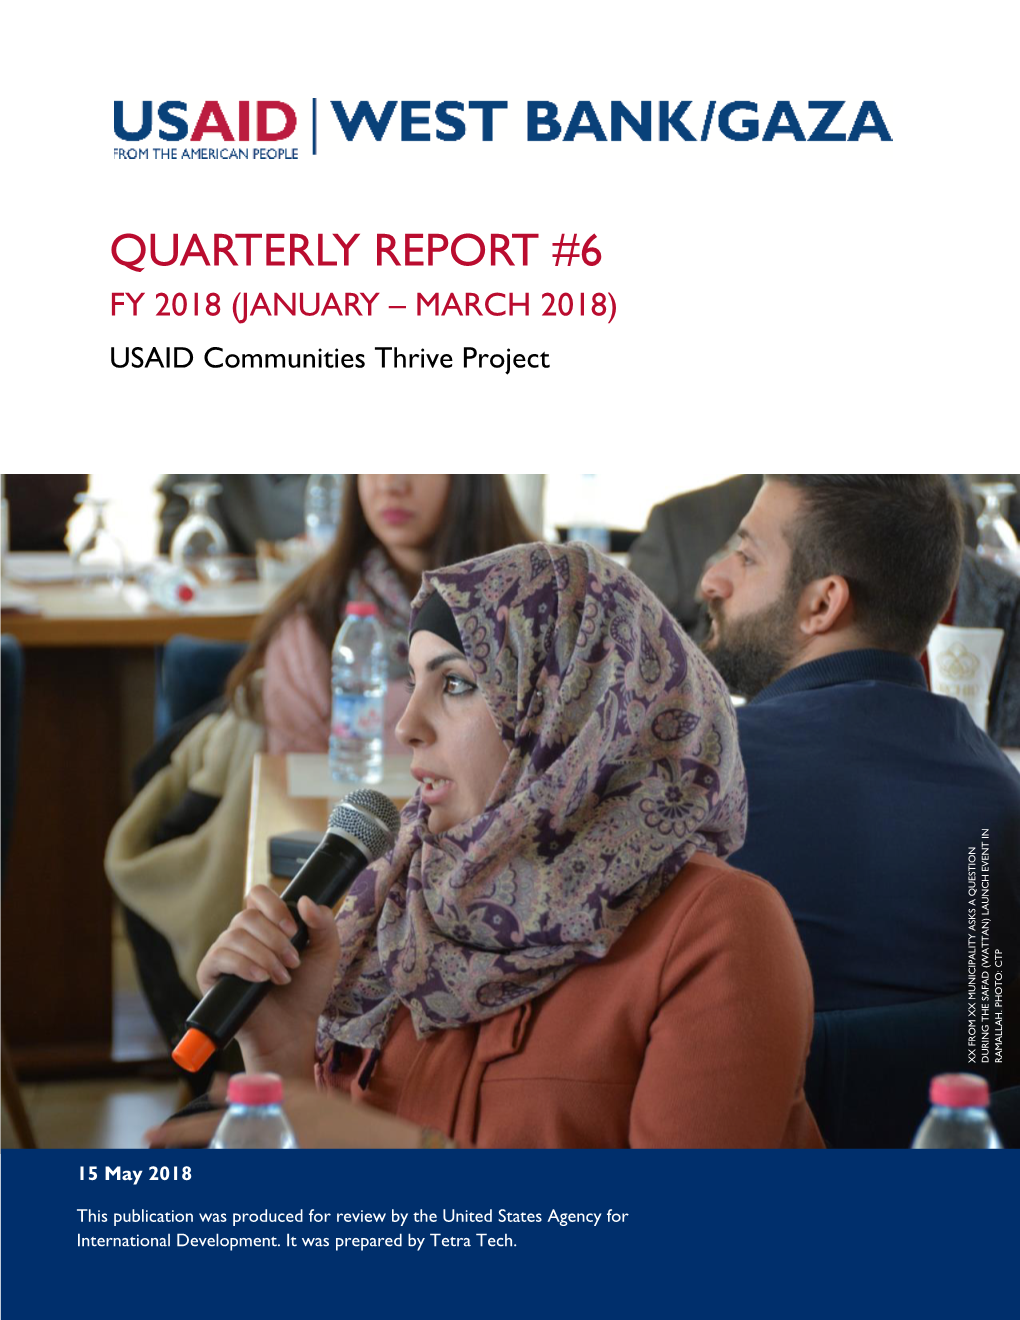 QUARTERLY REPORT #6 FY 2018 (JANUARY – MARCH 2018) USAID Communities Thrive Project